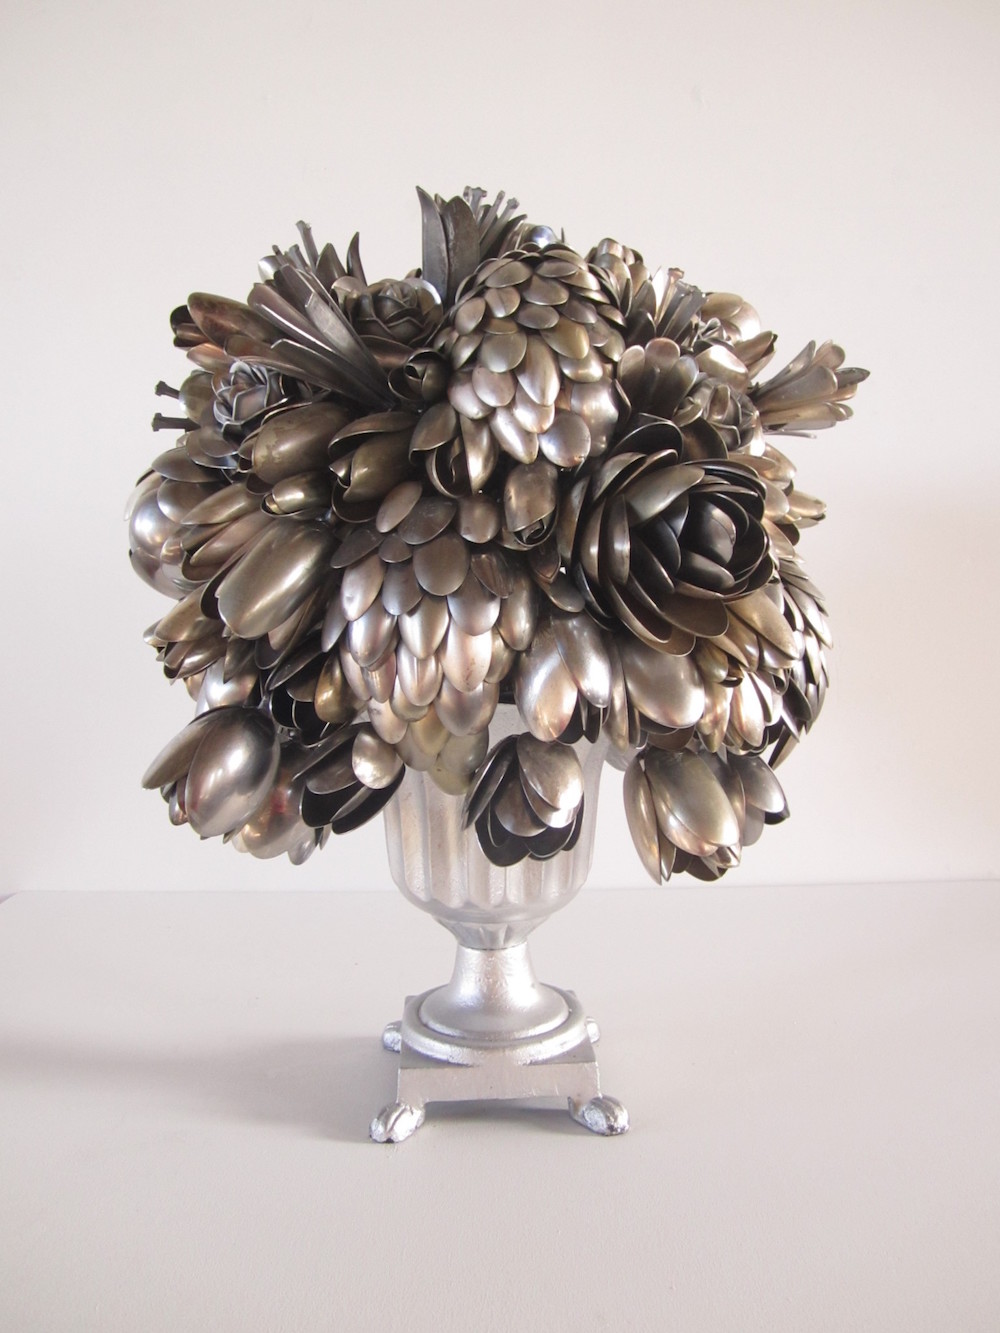 Amazingly Intricate Metal Bouquets Made Of Spare Utensils By Ann Carrington 6